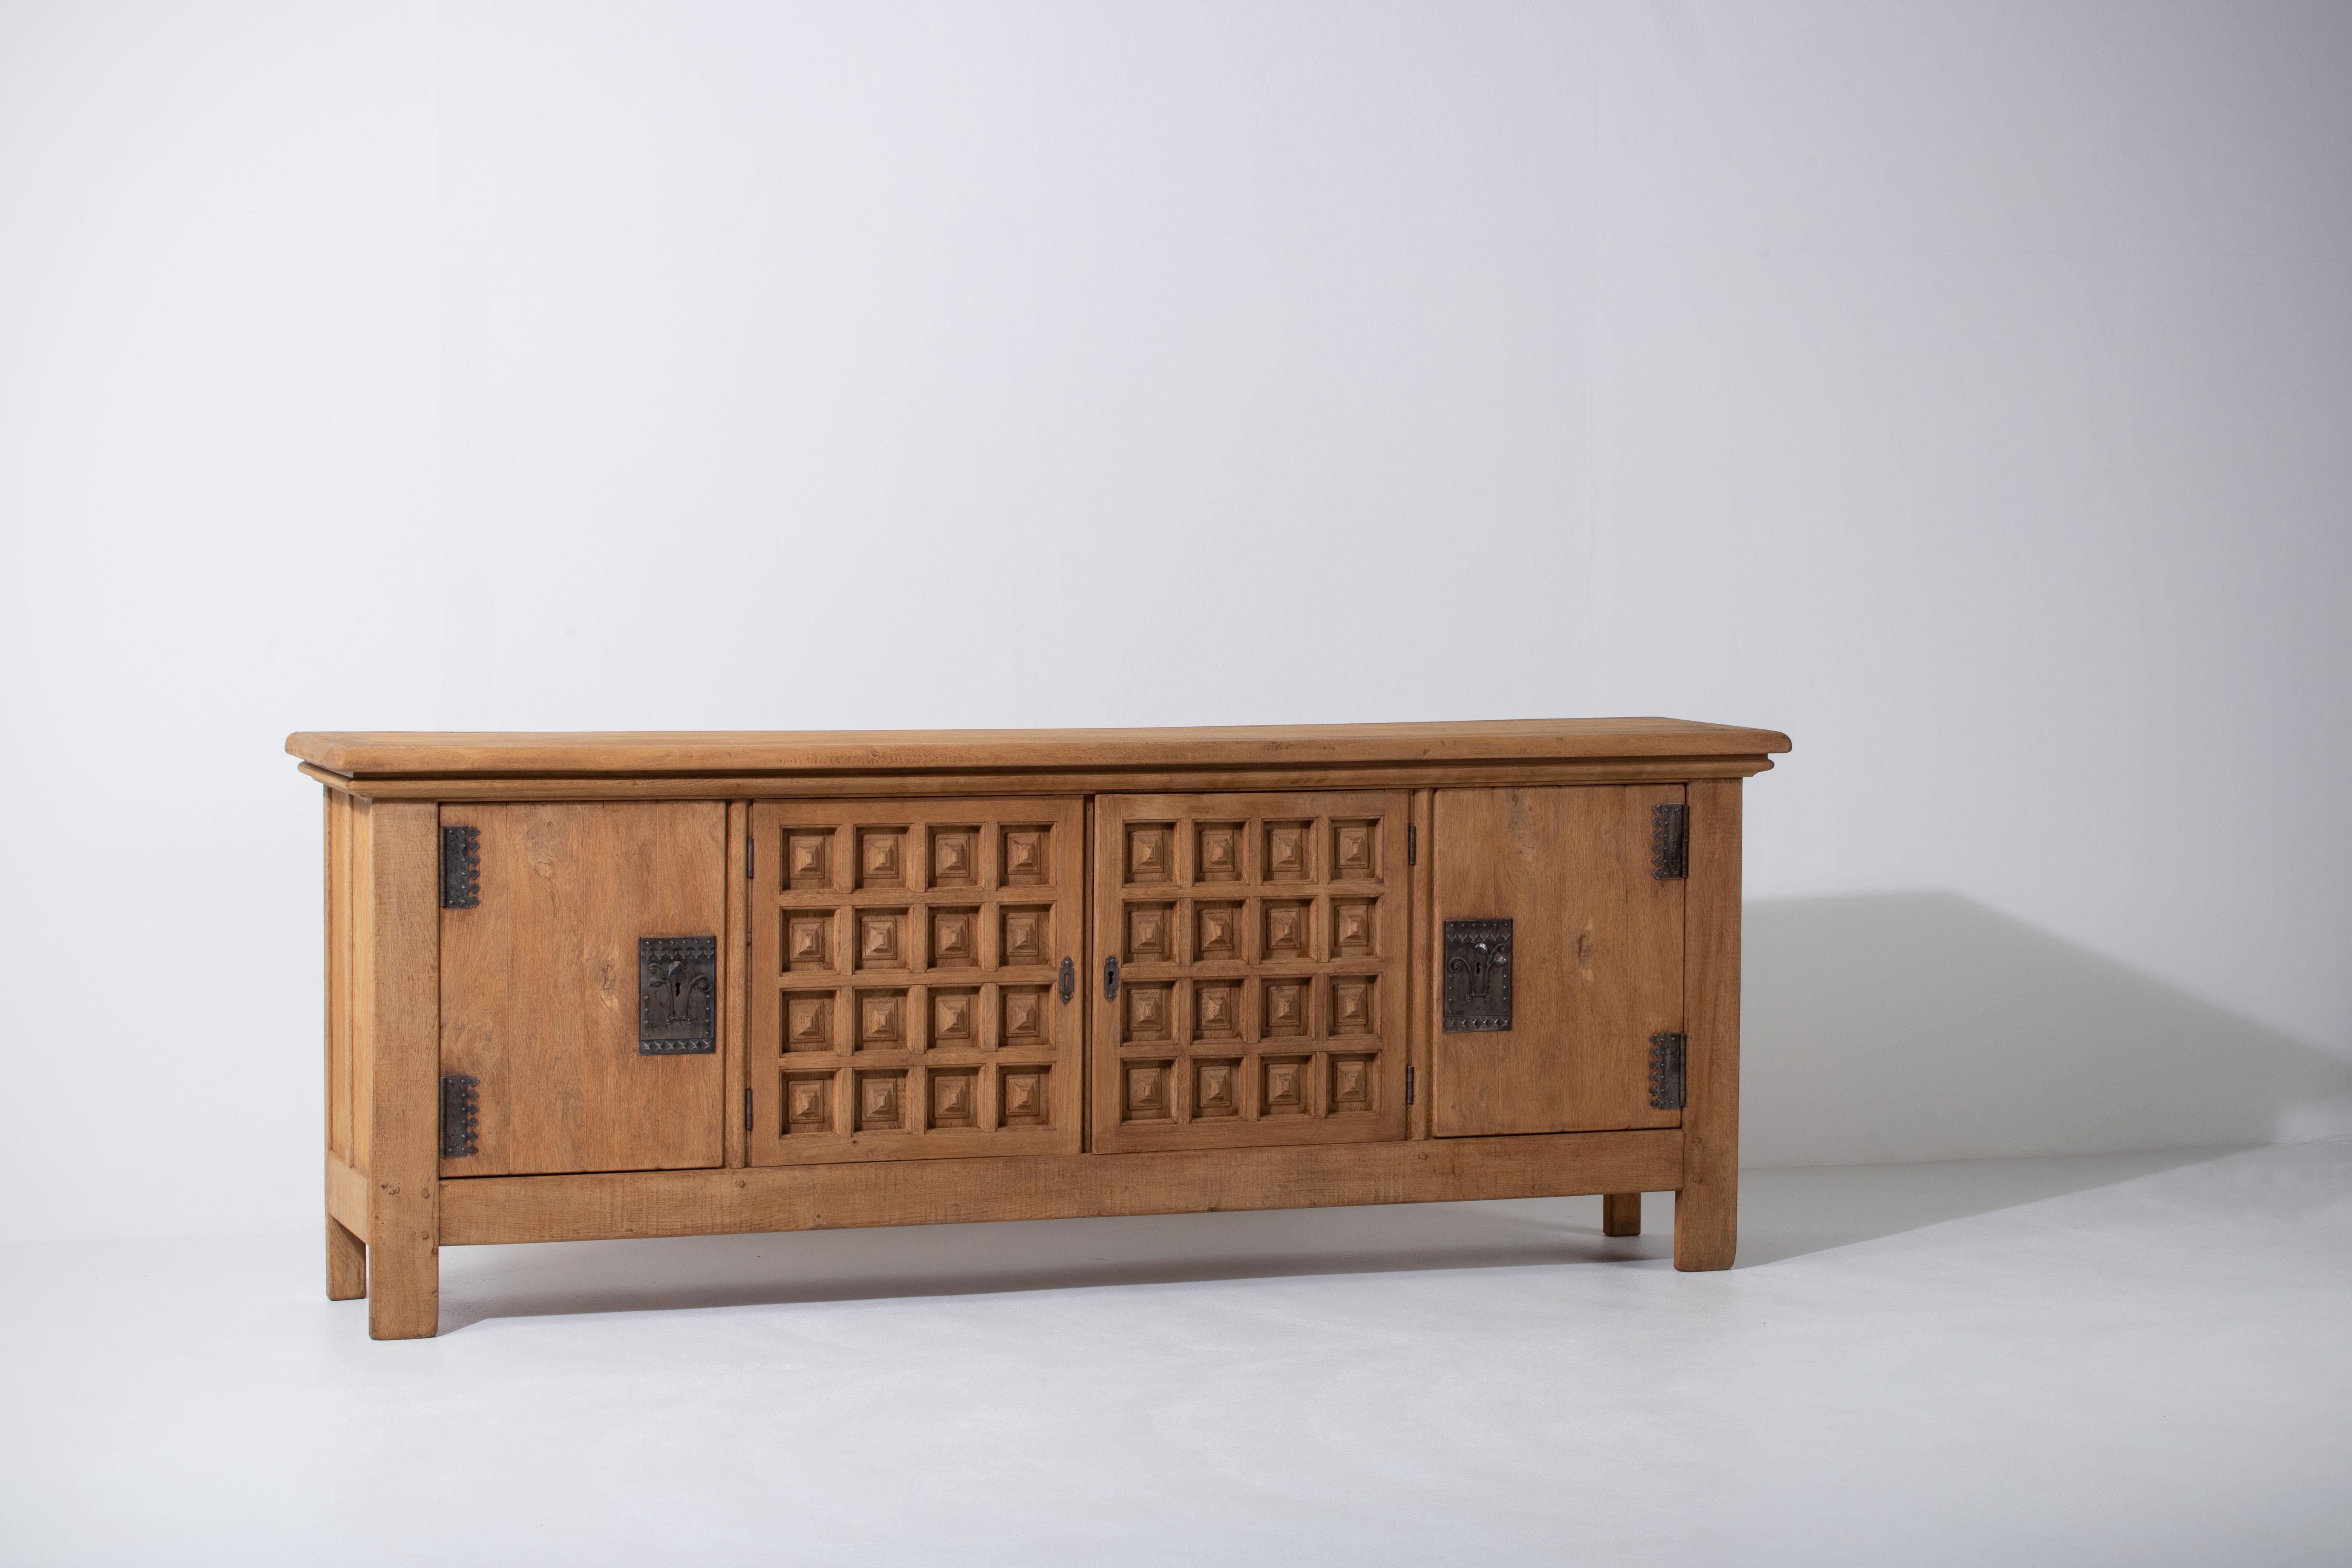 Presenting an impressive solid oak sideboard, hailing from the 1950s and echoing the rustic elegance of the French Alpine style. Stretching to an imposing 108.7 inches (approximately 276 cm), this piece was discovered in the vicinity of